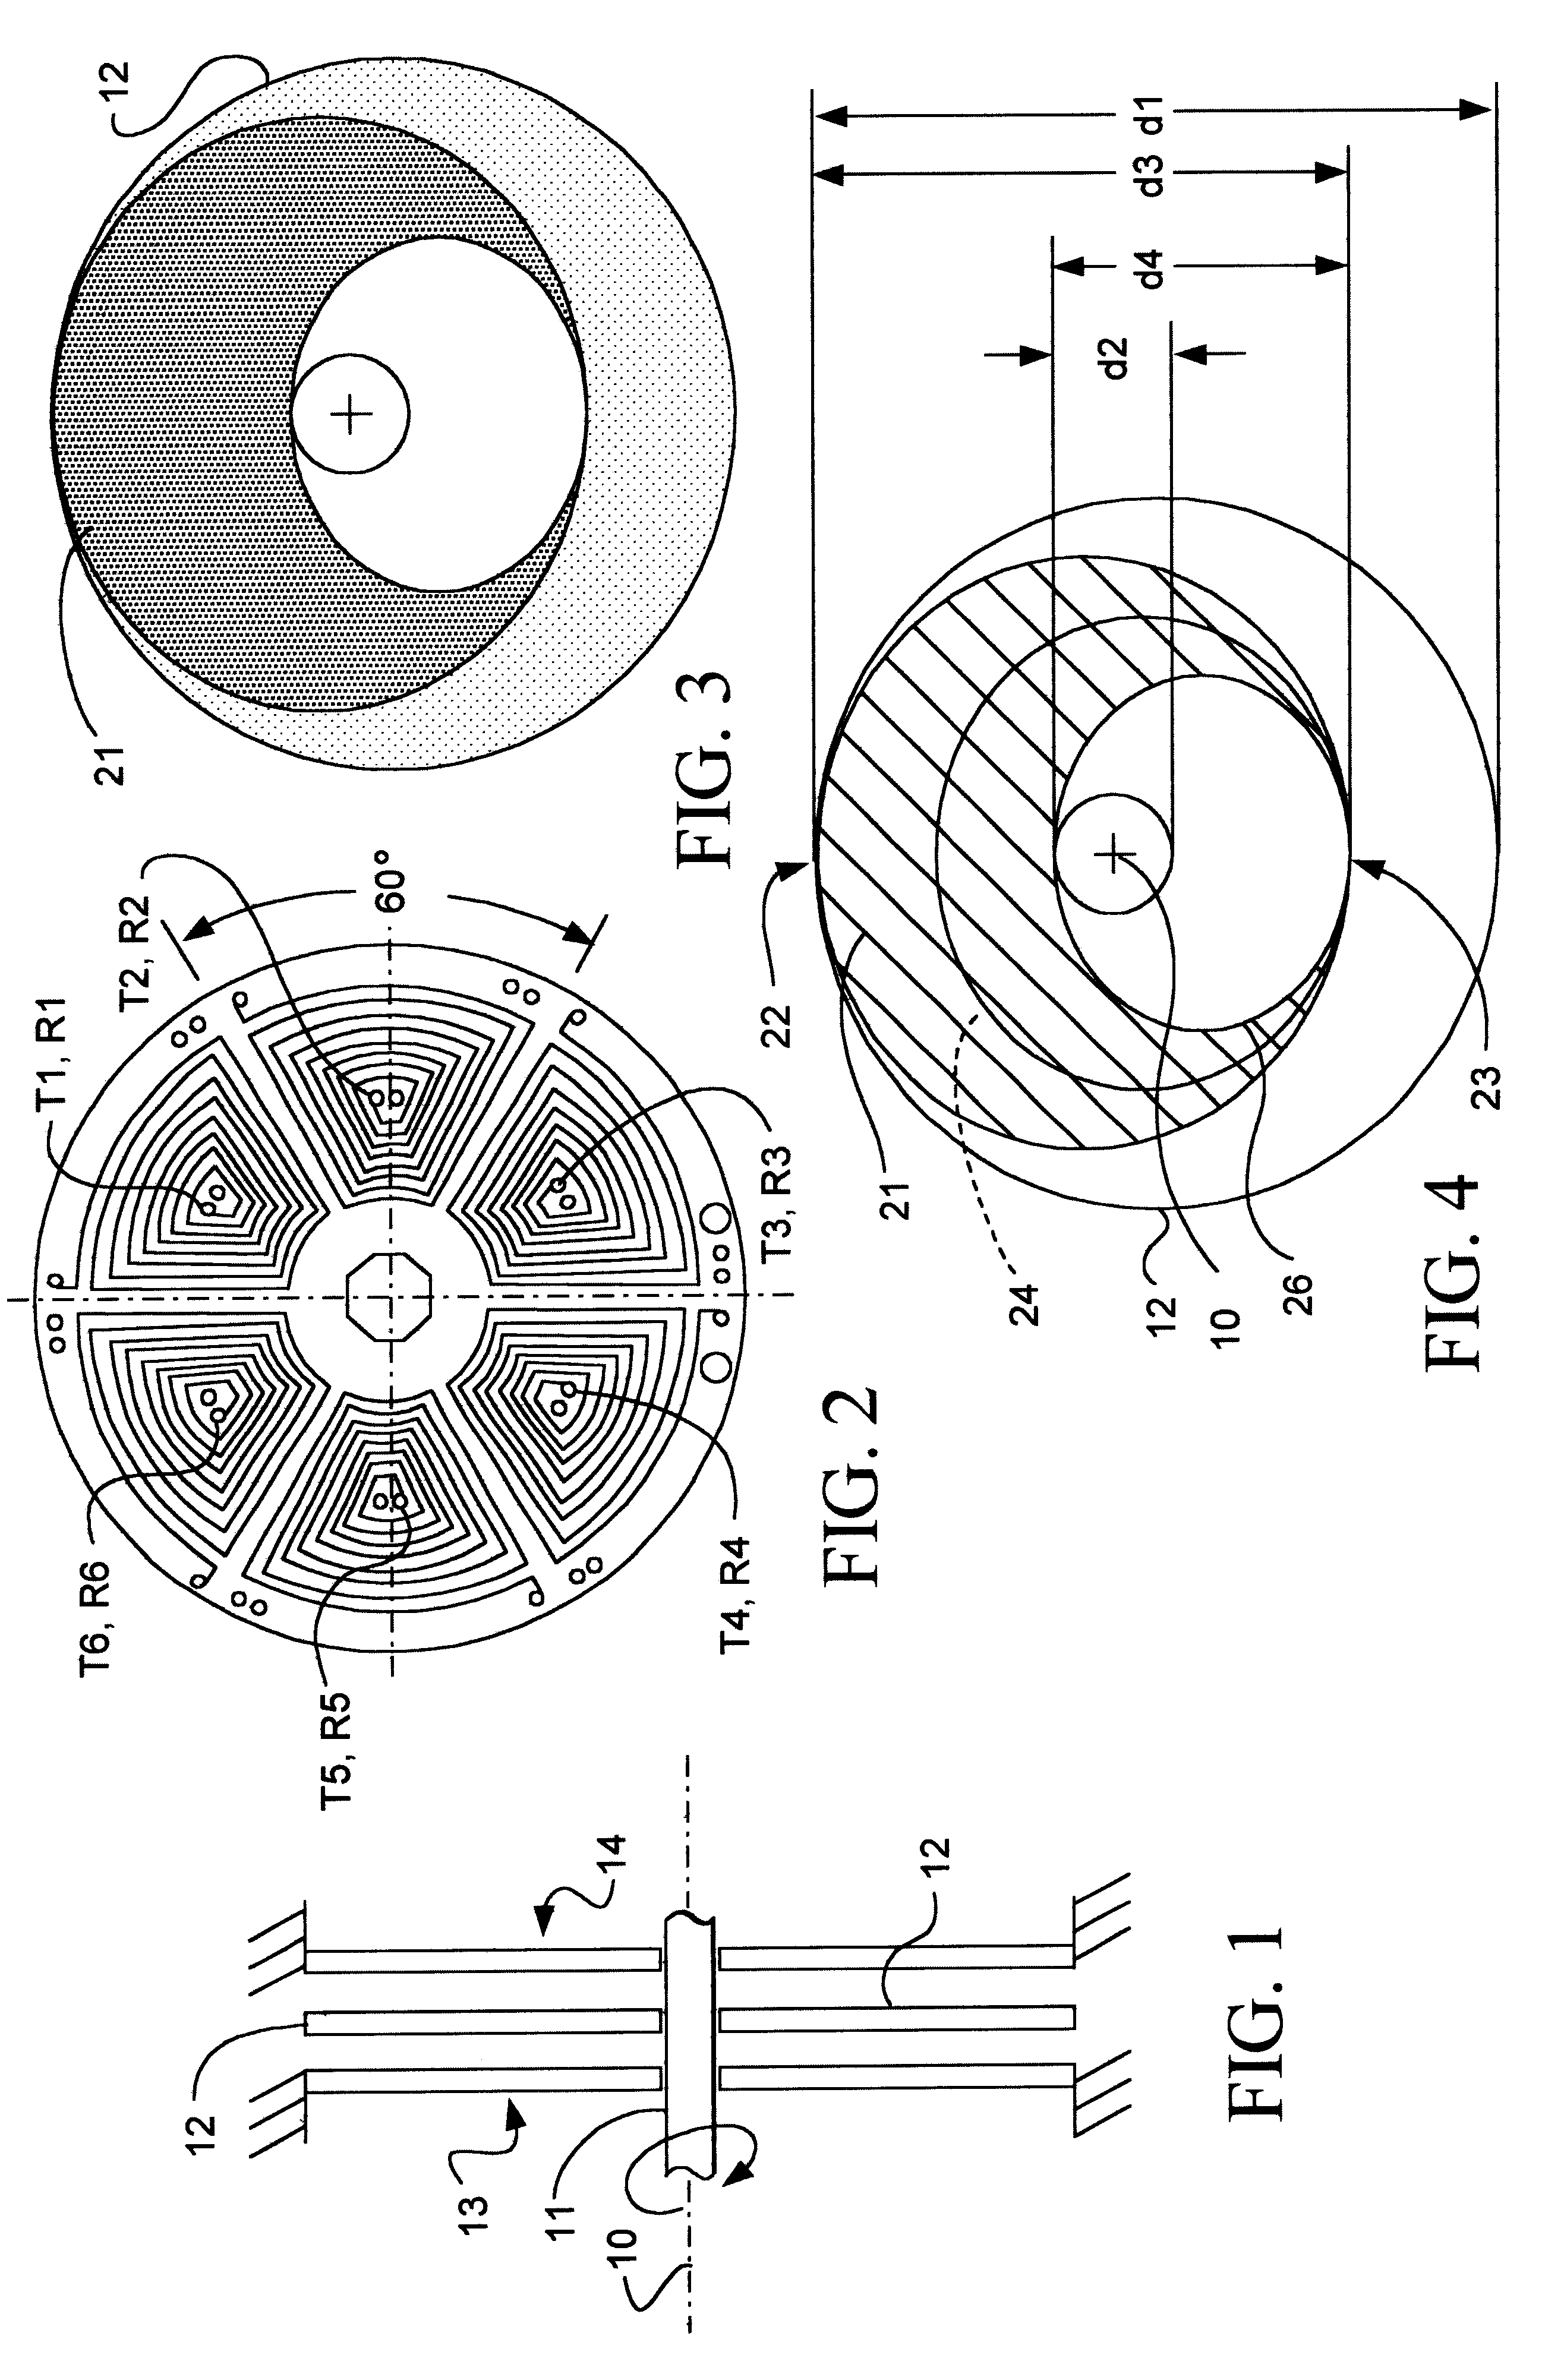 Angular position sensor with inductive attenuating coupler